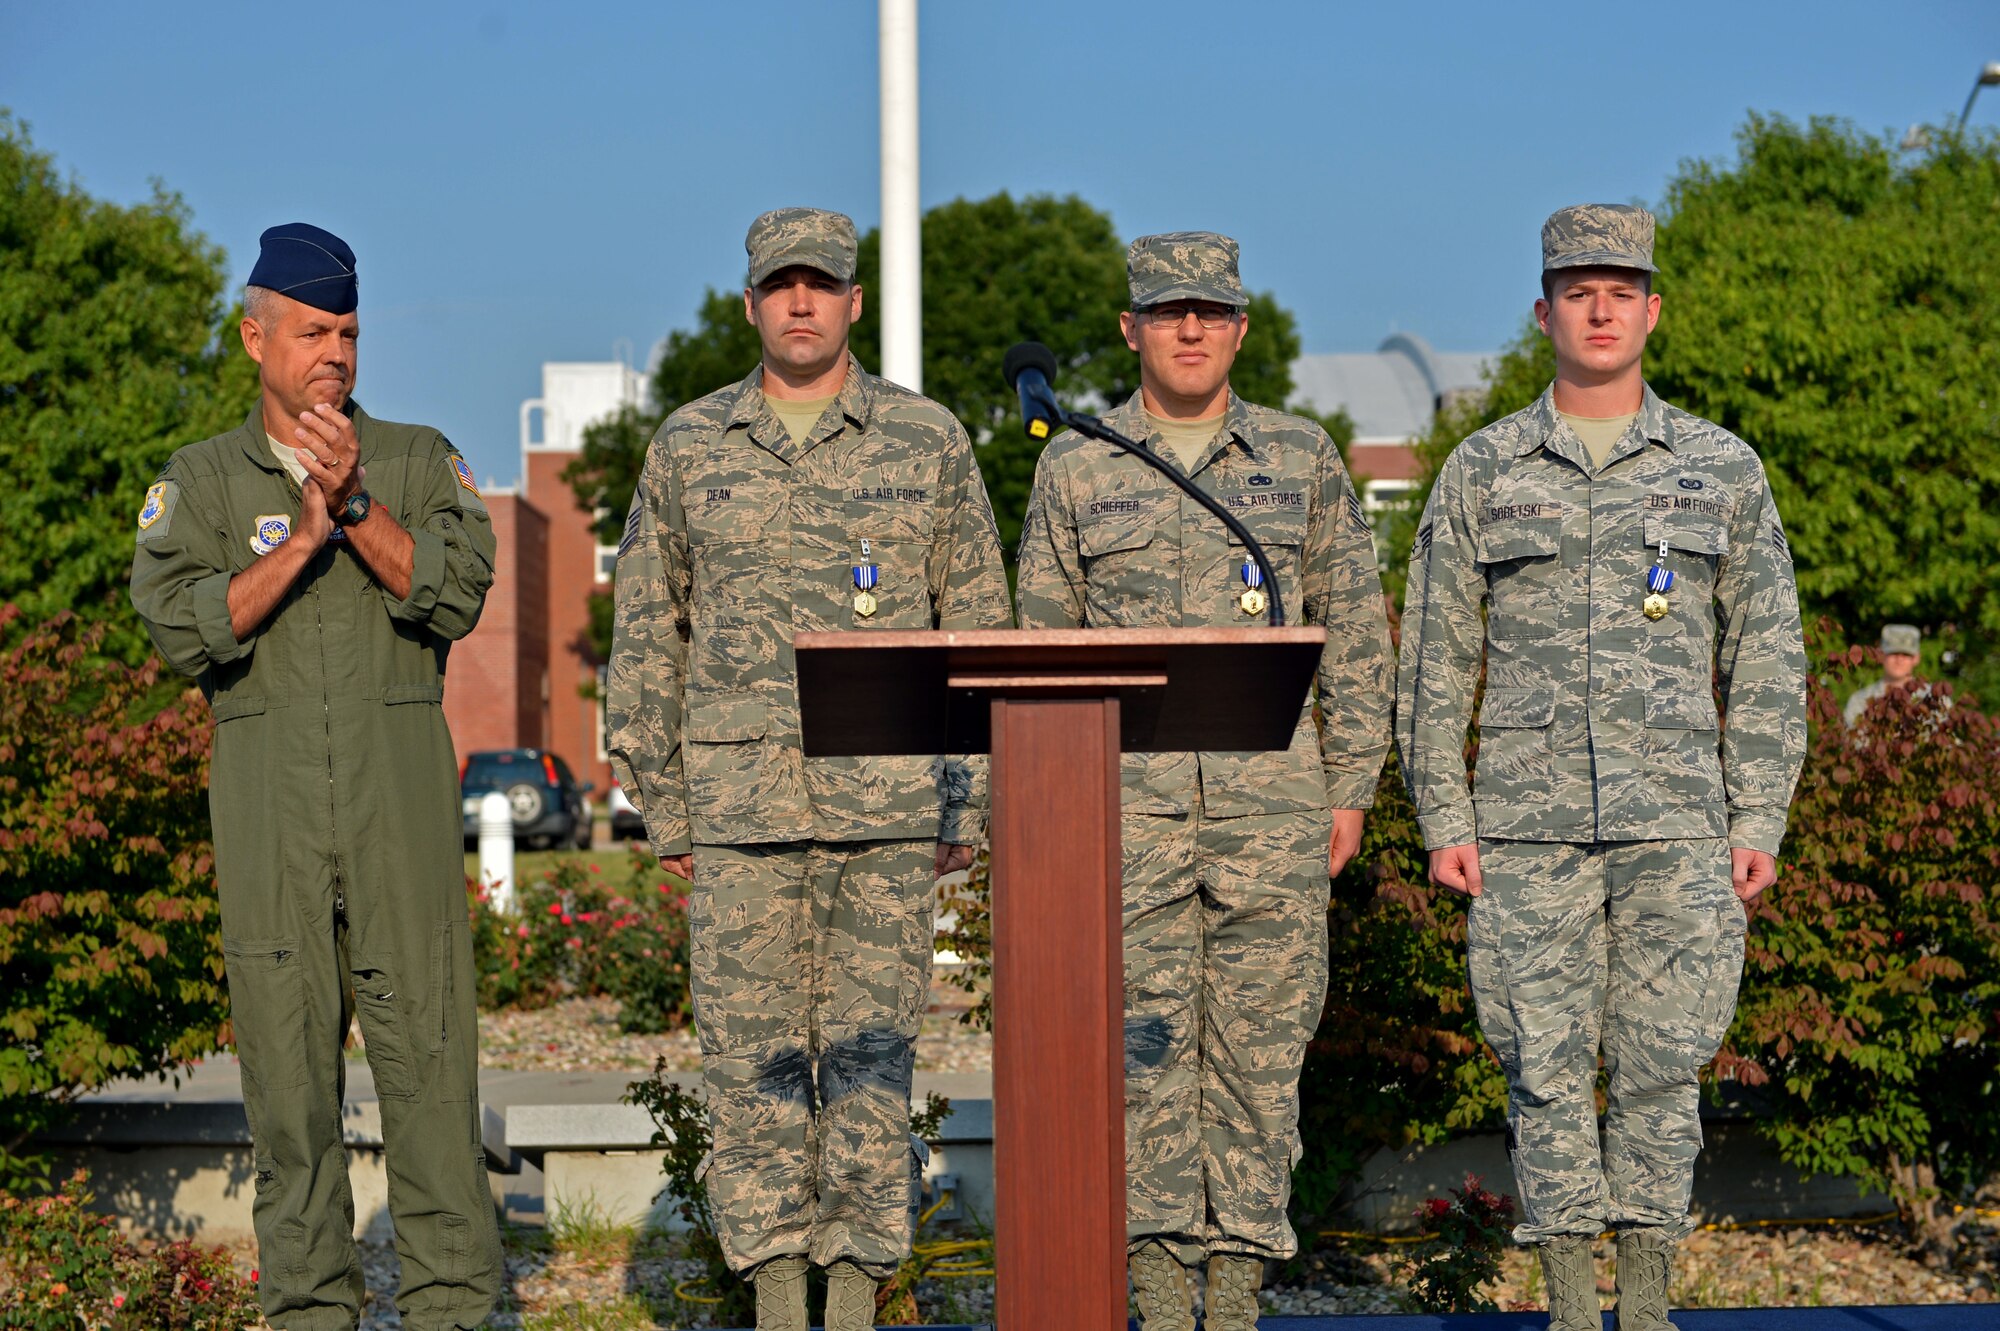 Master Sgt. Jeremy Dean, Staff Sgt. Dan Schieffer, and Senior Airman Jonathan Sobetski receive the Nebraska National Guard Commendation Medal Aug. 5, 2018, at the Nebraska National Guard air base, Lincoln, Nebraska. Capt. John Kupka, the commander of the 155th Logistics Readiness Squadron's distribution flight, and Staff Sgt. Matthew Riley, a traffic management operator with the 155th LRS, were not present for the award ceremony.
 (U.S. Air Force photo taken by Senior Airman Jamie Titus/ Released)